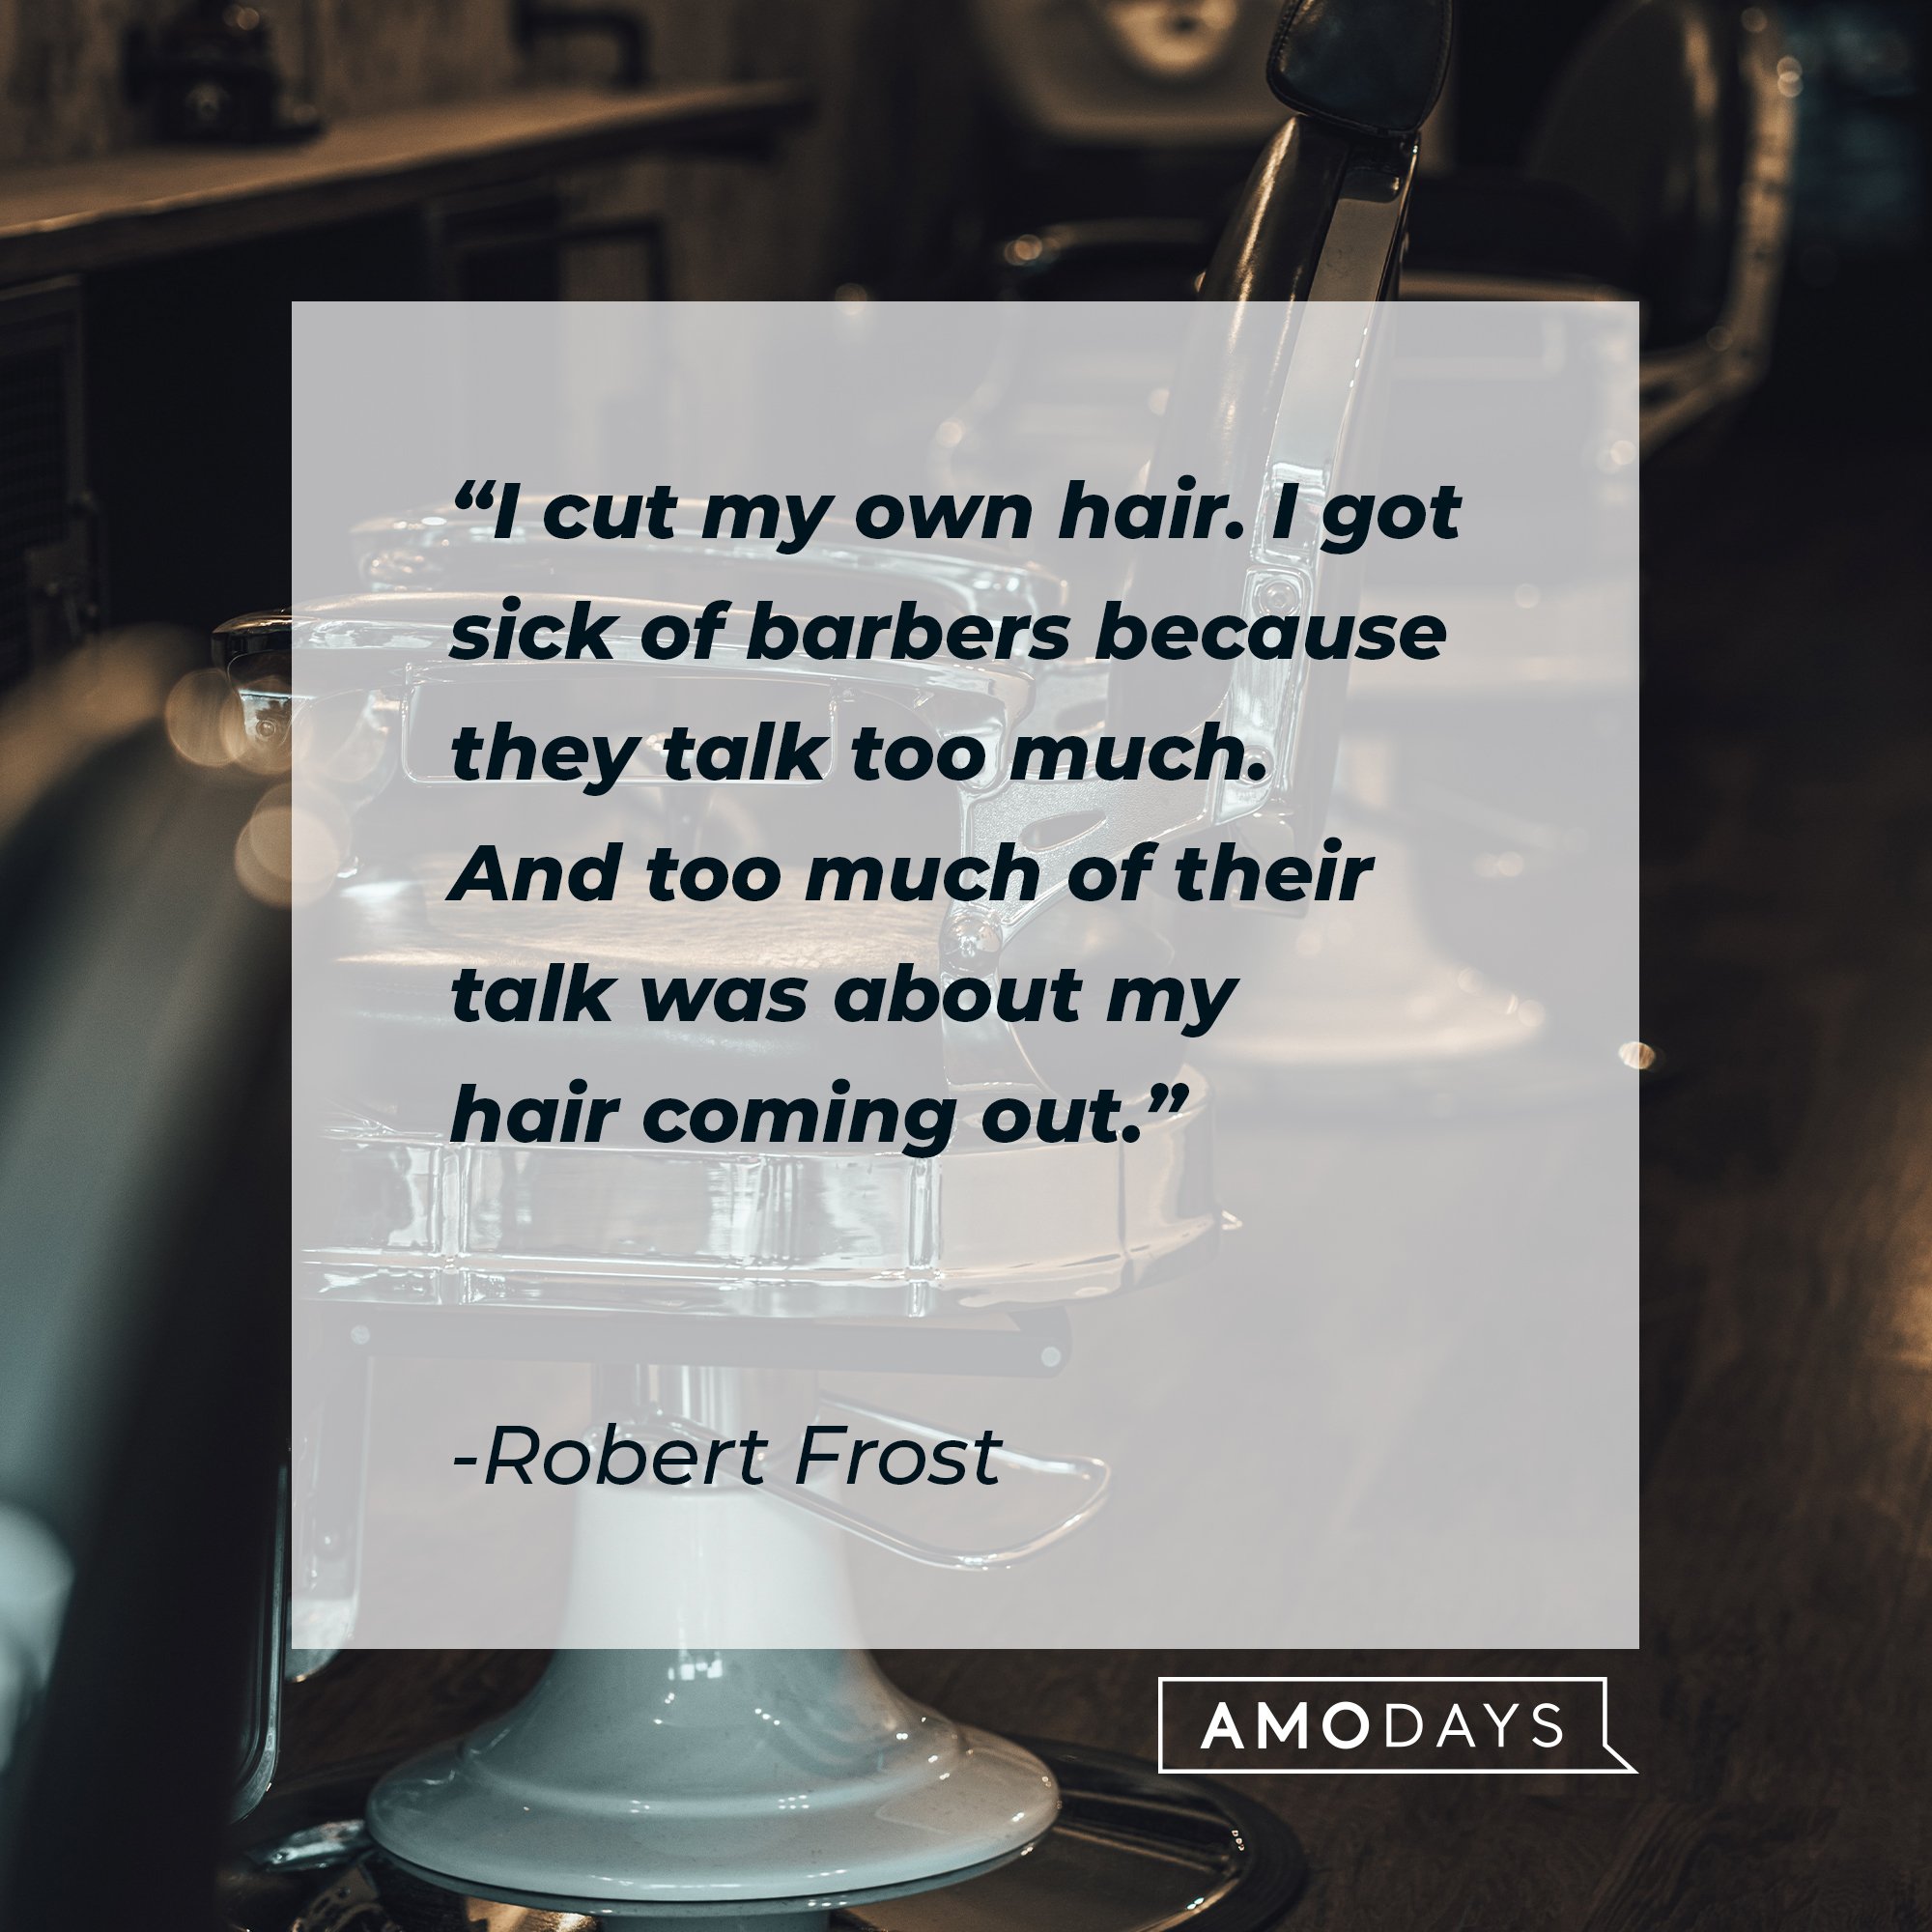 Robert Frost's quote: "I cut my own hair. I got sick of barbers because they talk too much. And too much of their talk was about my hair coming out." | Image: AmoDays